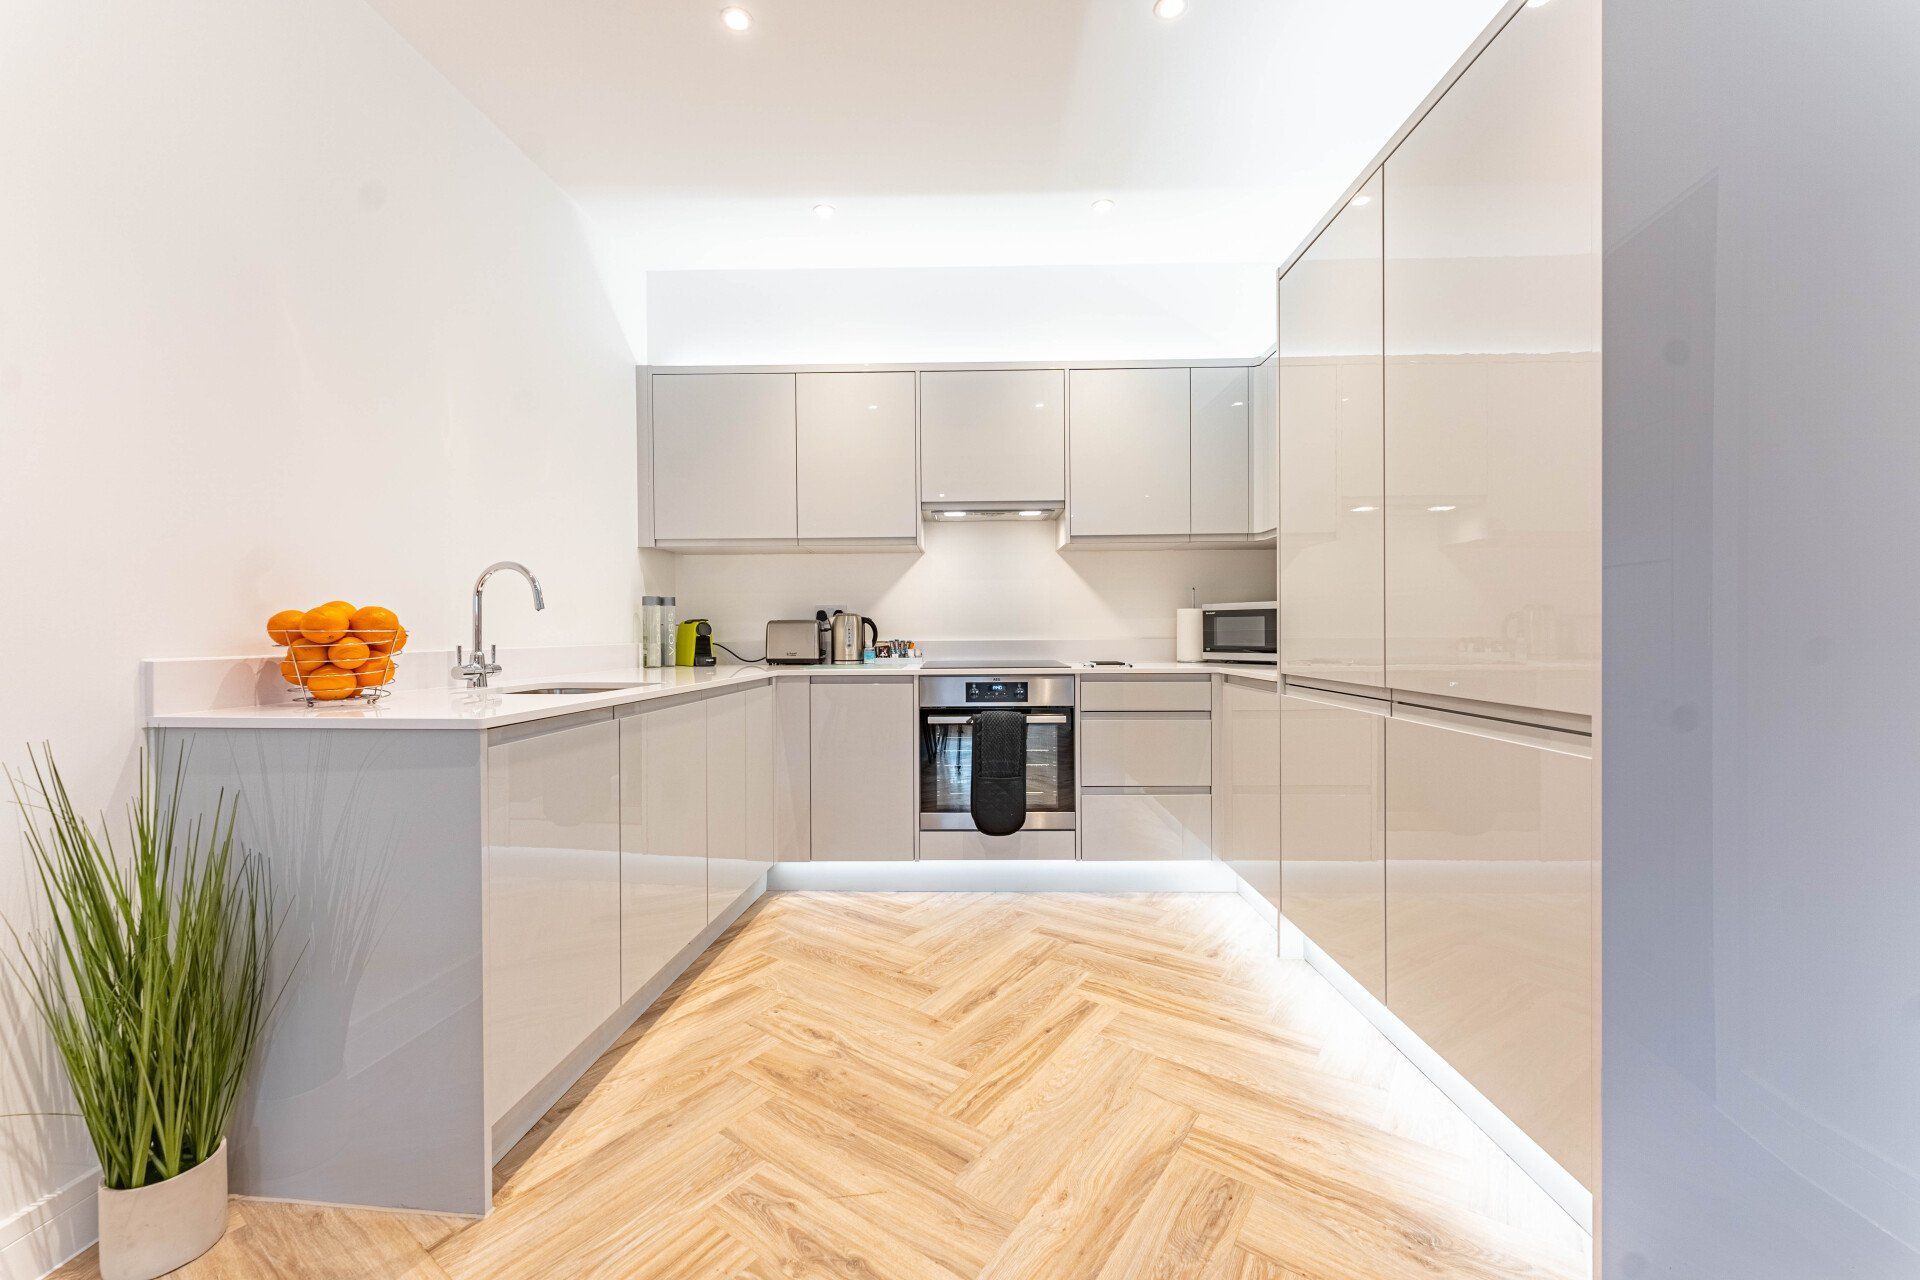 Wellington House Celador serviced apartment in Reading kitchen